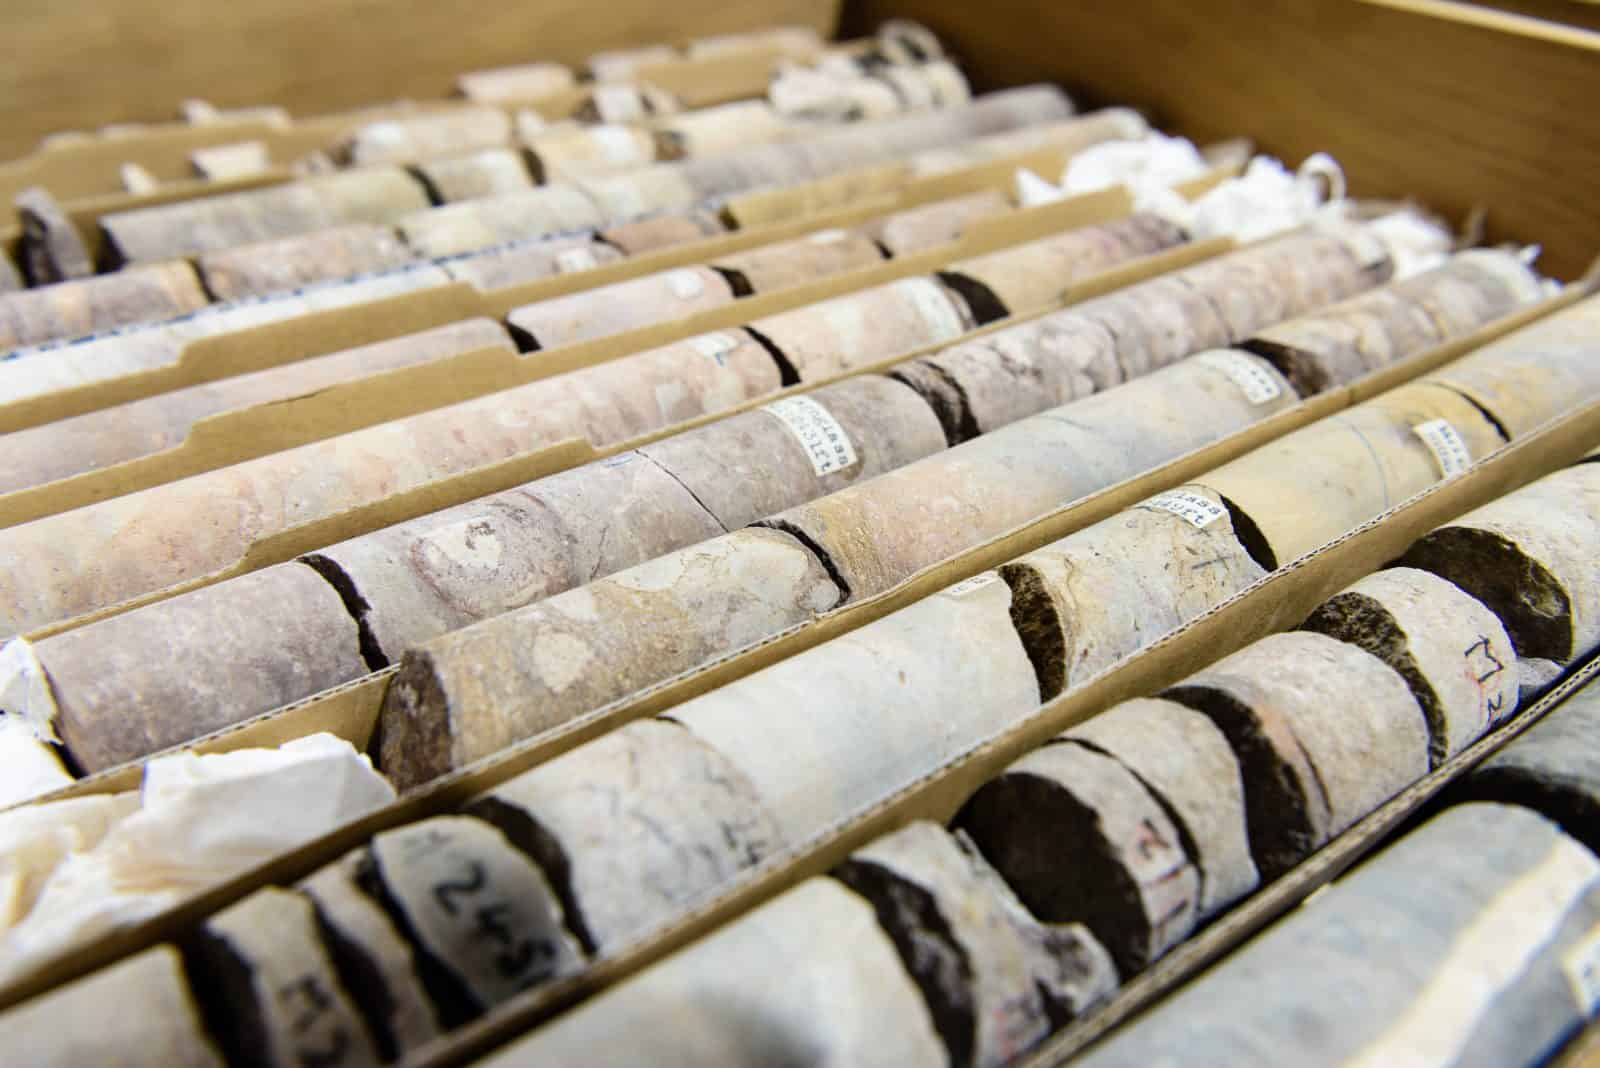 Rock core samples at the Geological Survey of Northern Ireland